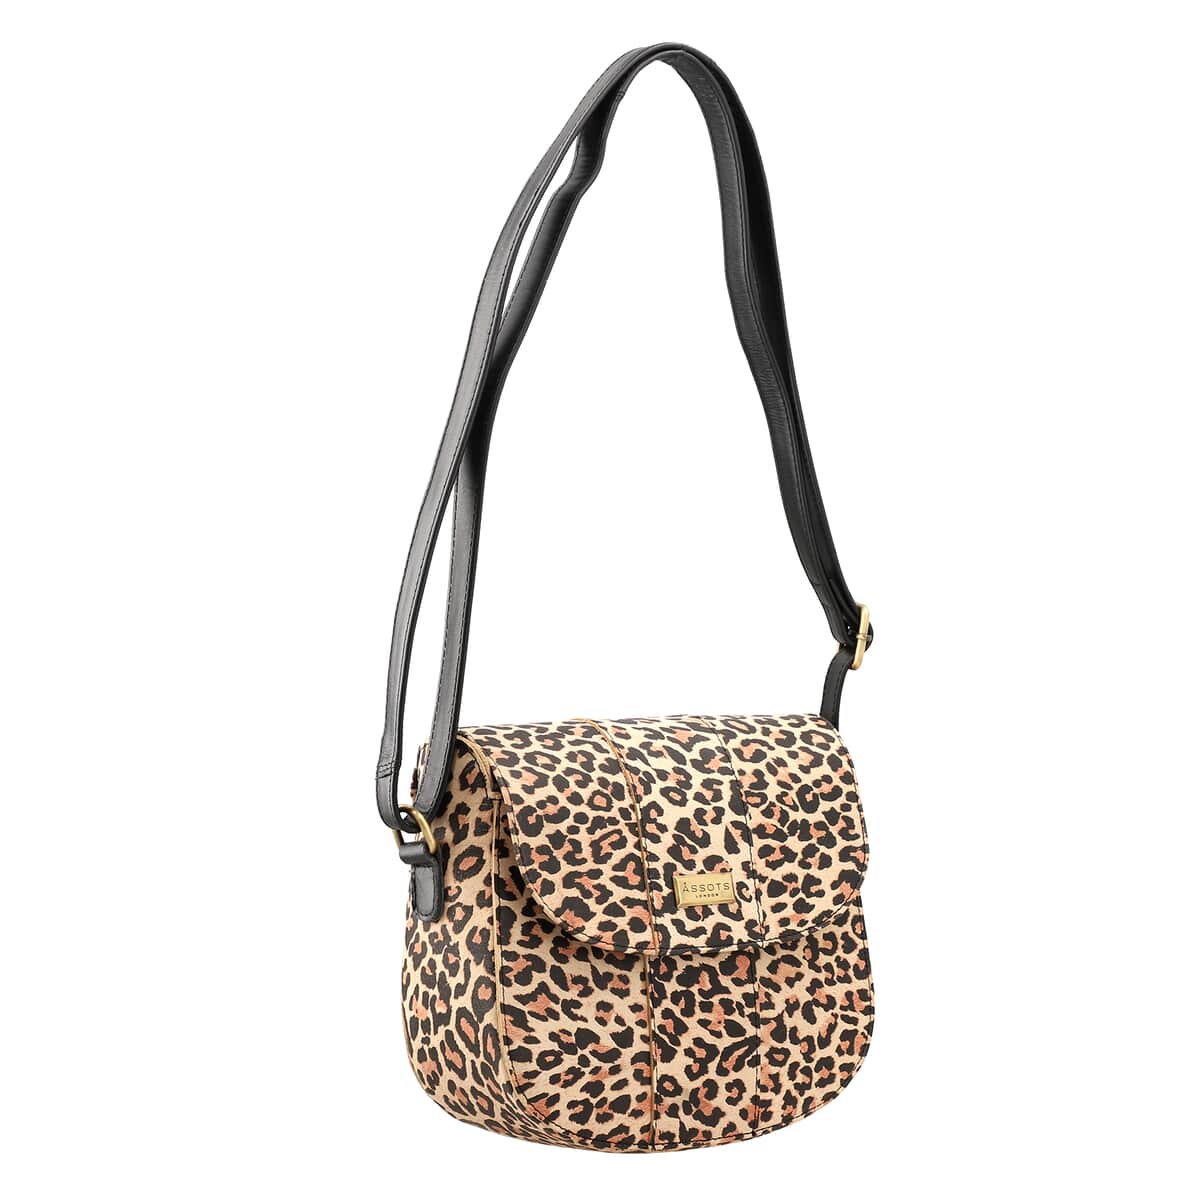 100% Genuine Leather Leopard Print Crossbody Sling Bag Size: 8.66(L)x8.07(H)x3.13(W) Inches Color: Brown image number 4